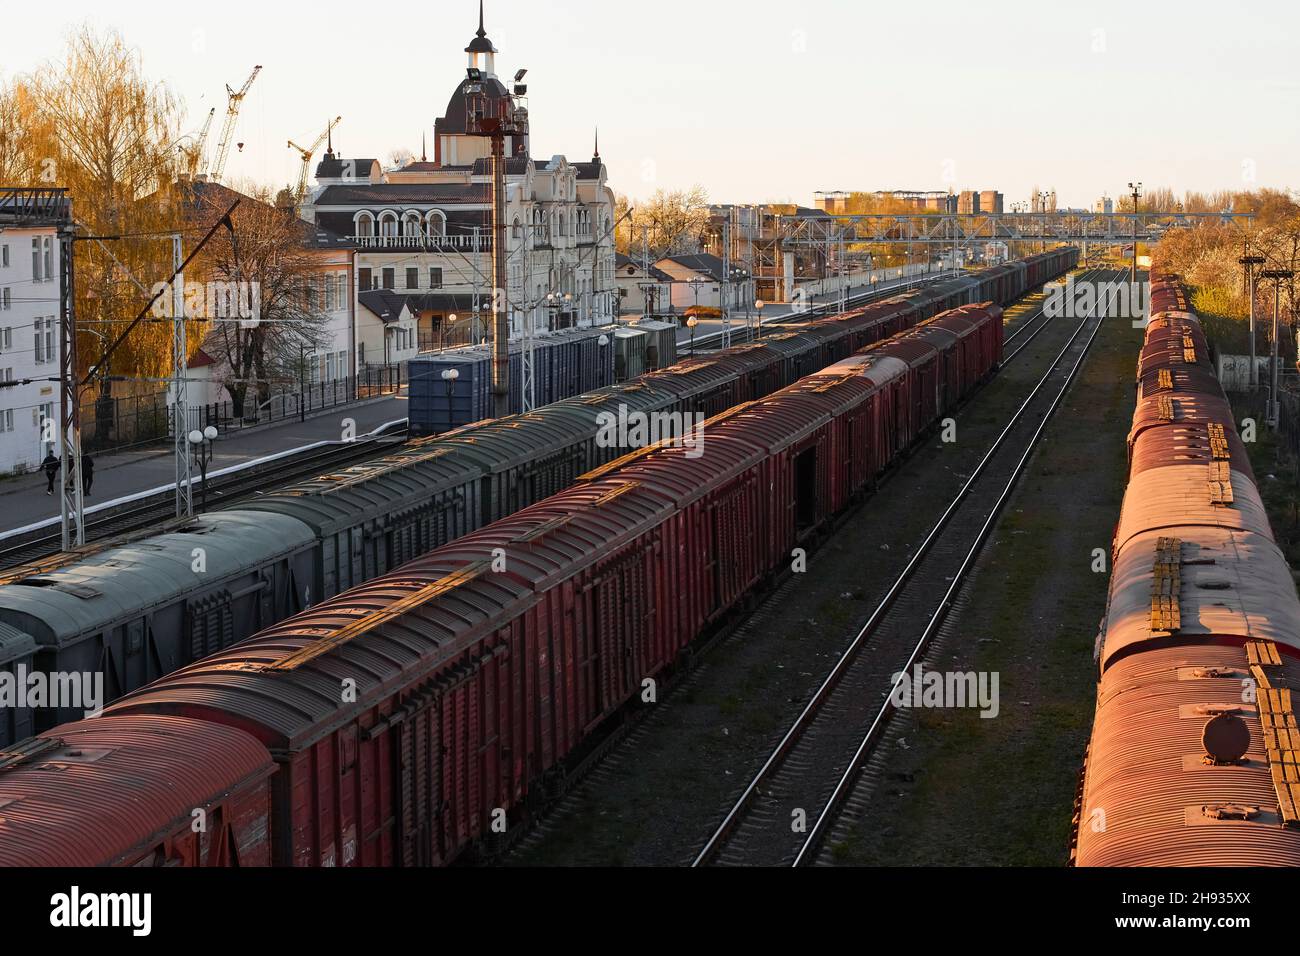 Lutsk, Ukraine - May 26,2021: Roofs of cargo train with shipping container in depot. Freight train carriages at railway station. Classification or Stock Photo